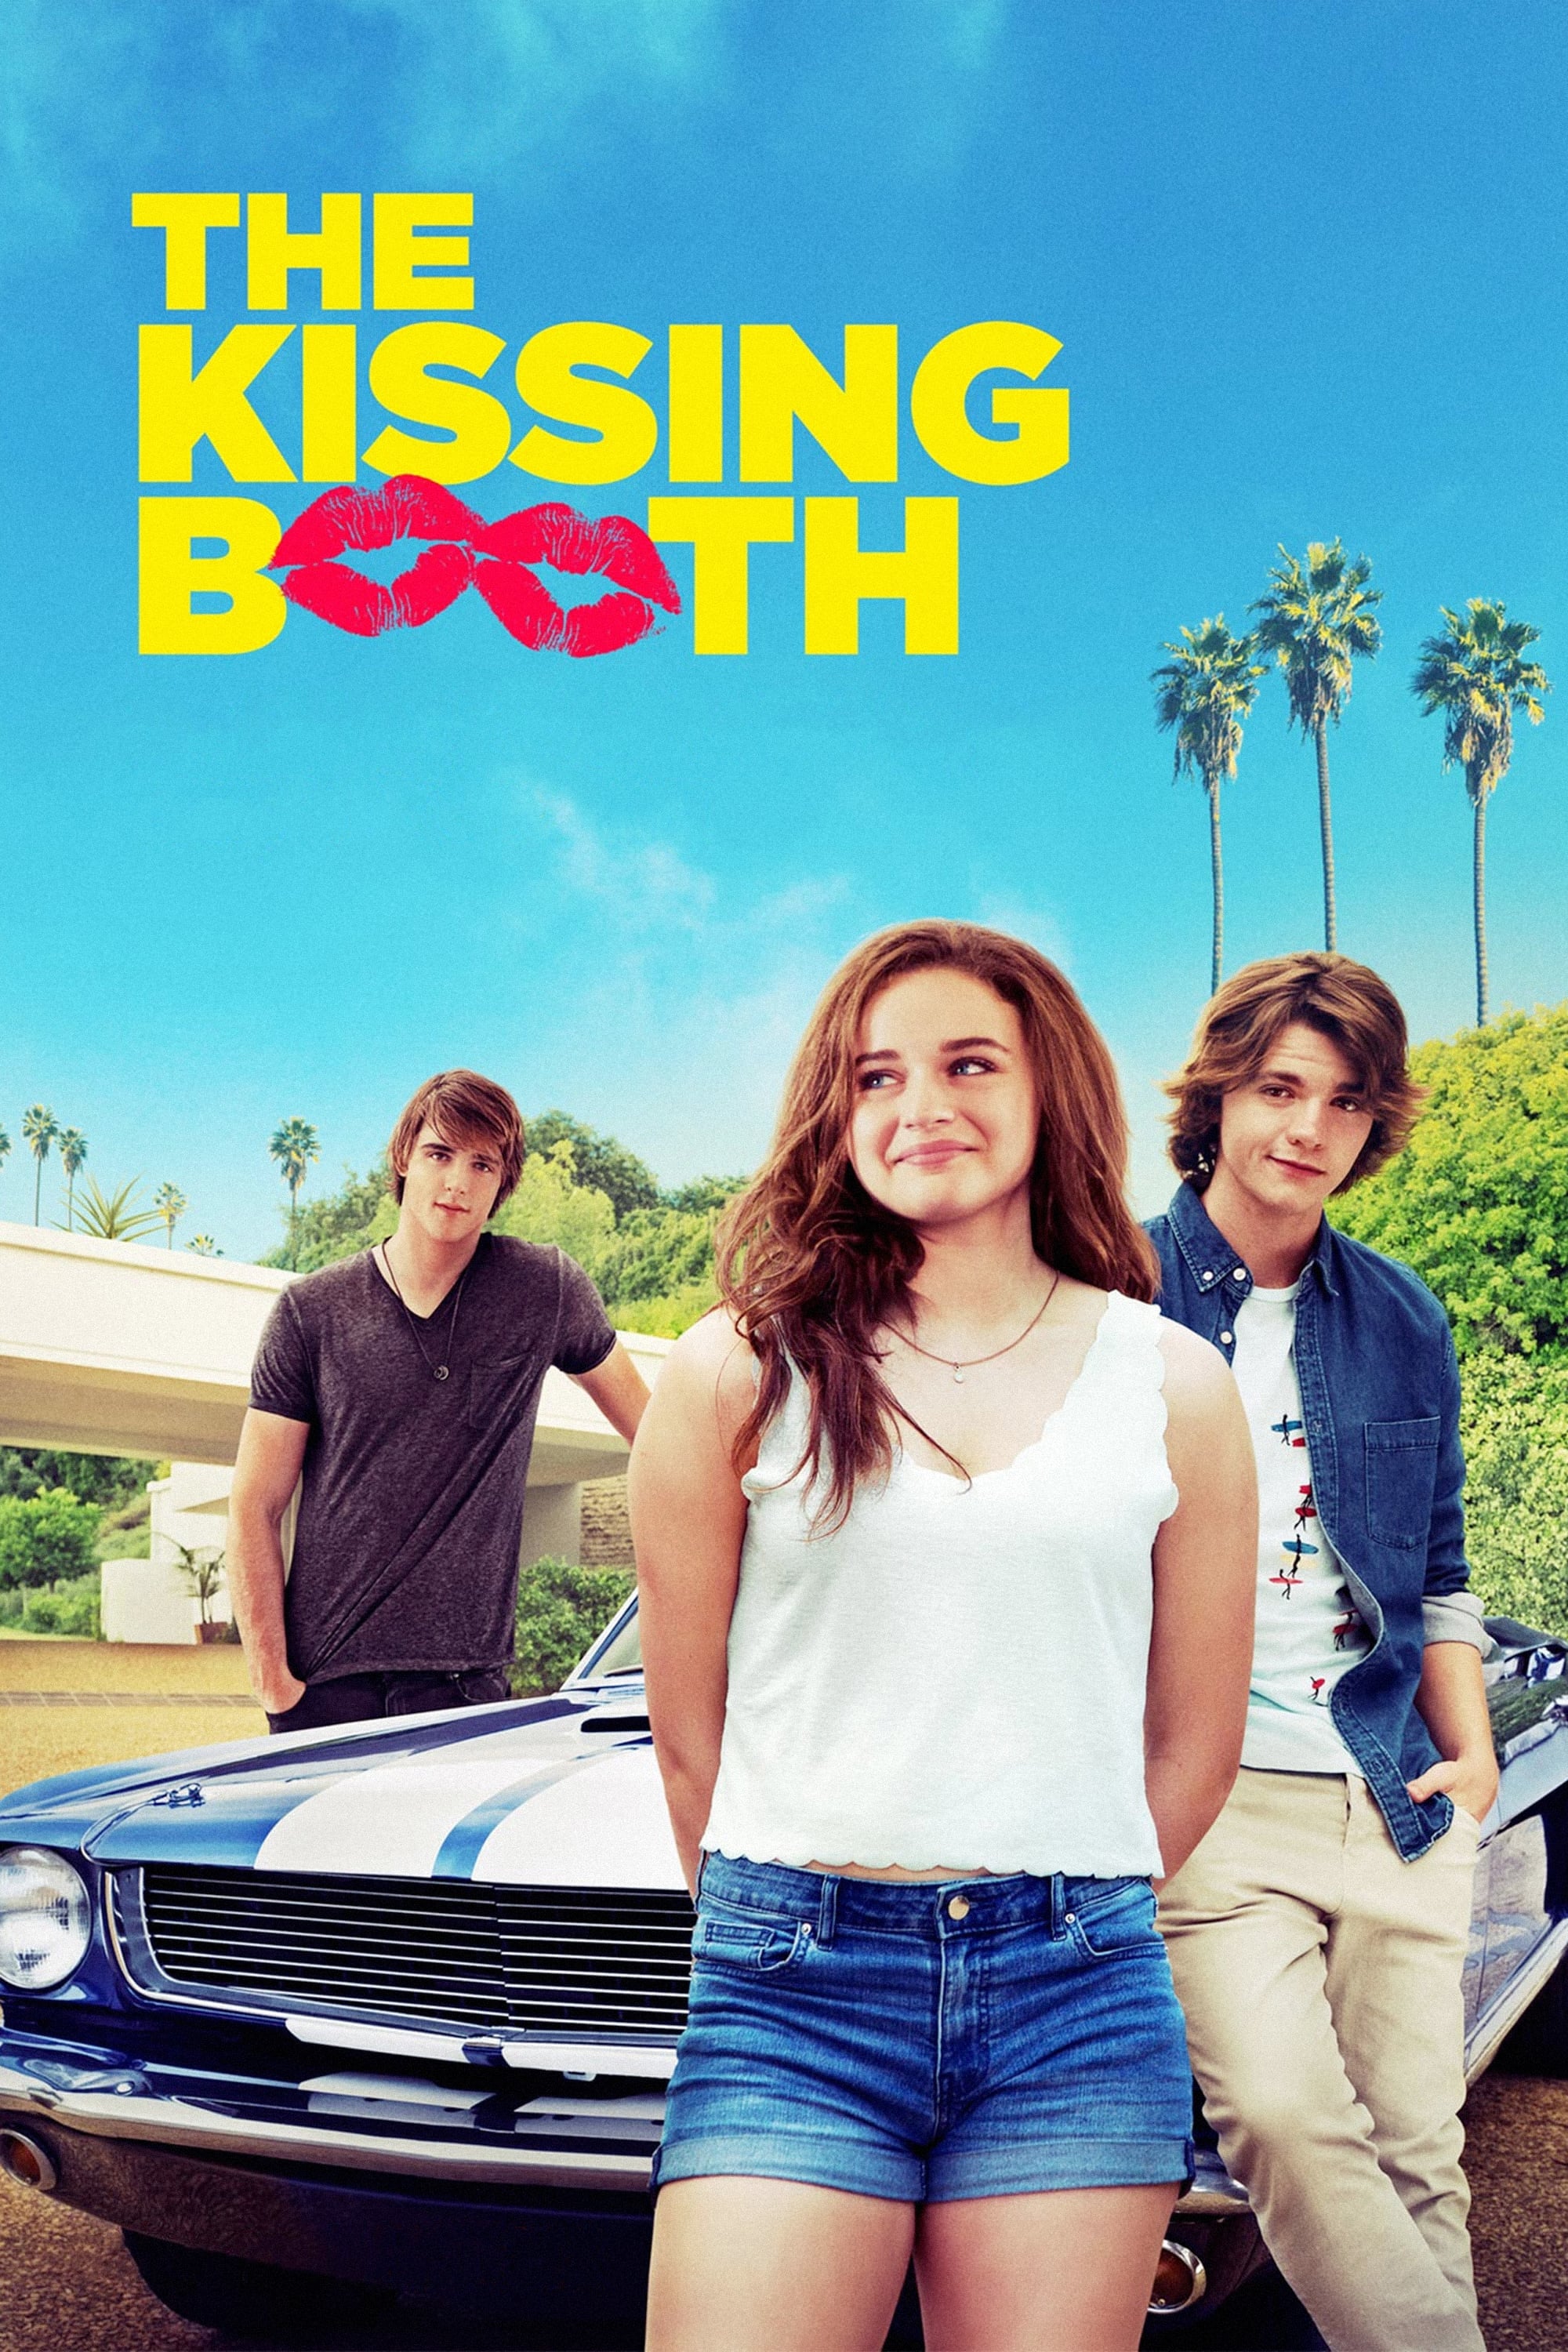 The Kissing Booth (2018)